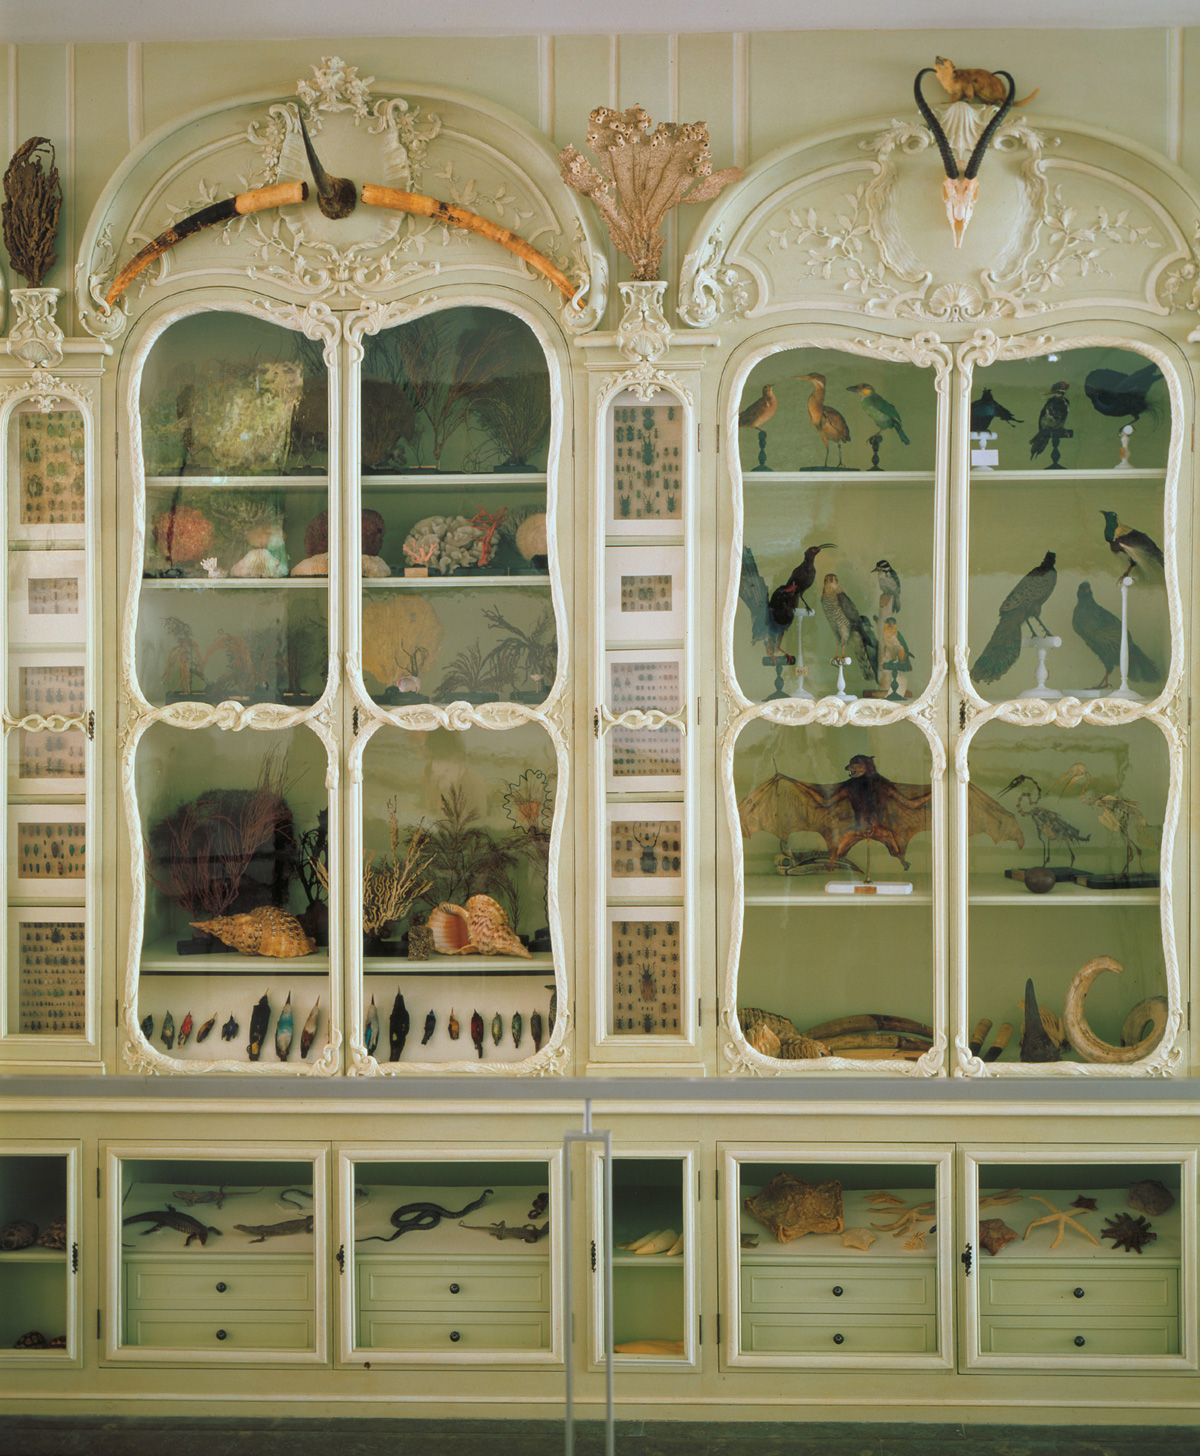 A photograph of Bonnier de la Mosson’s Second Cabinet of Natural History as it stands today.